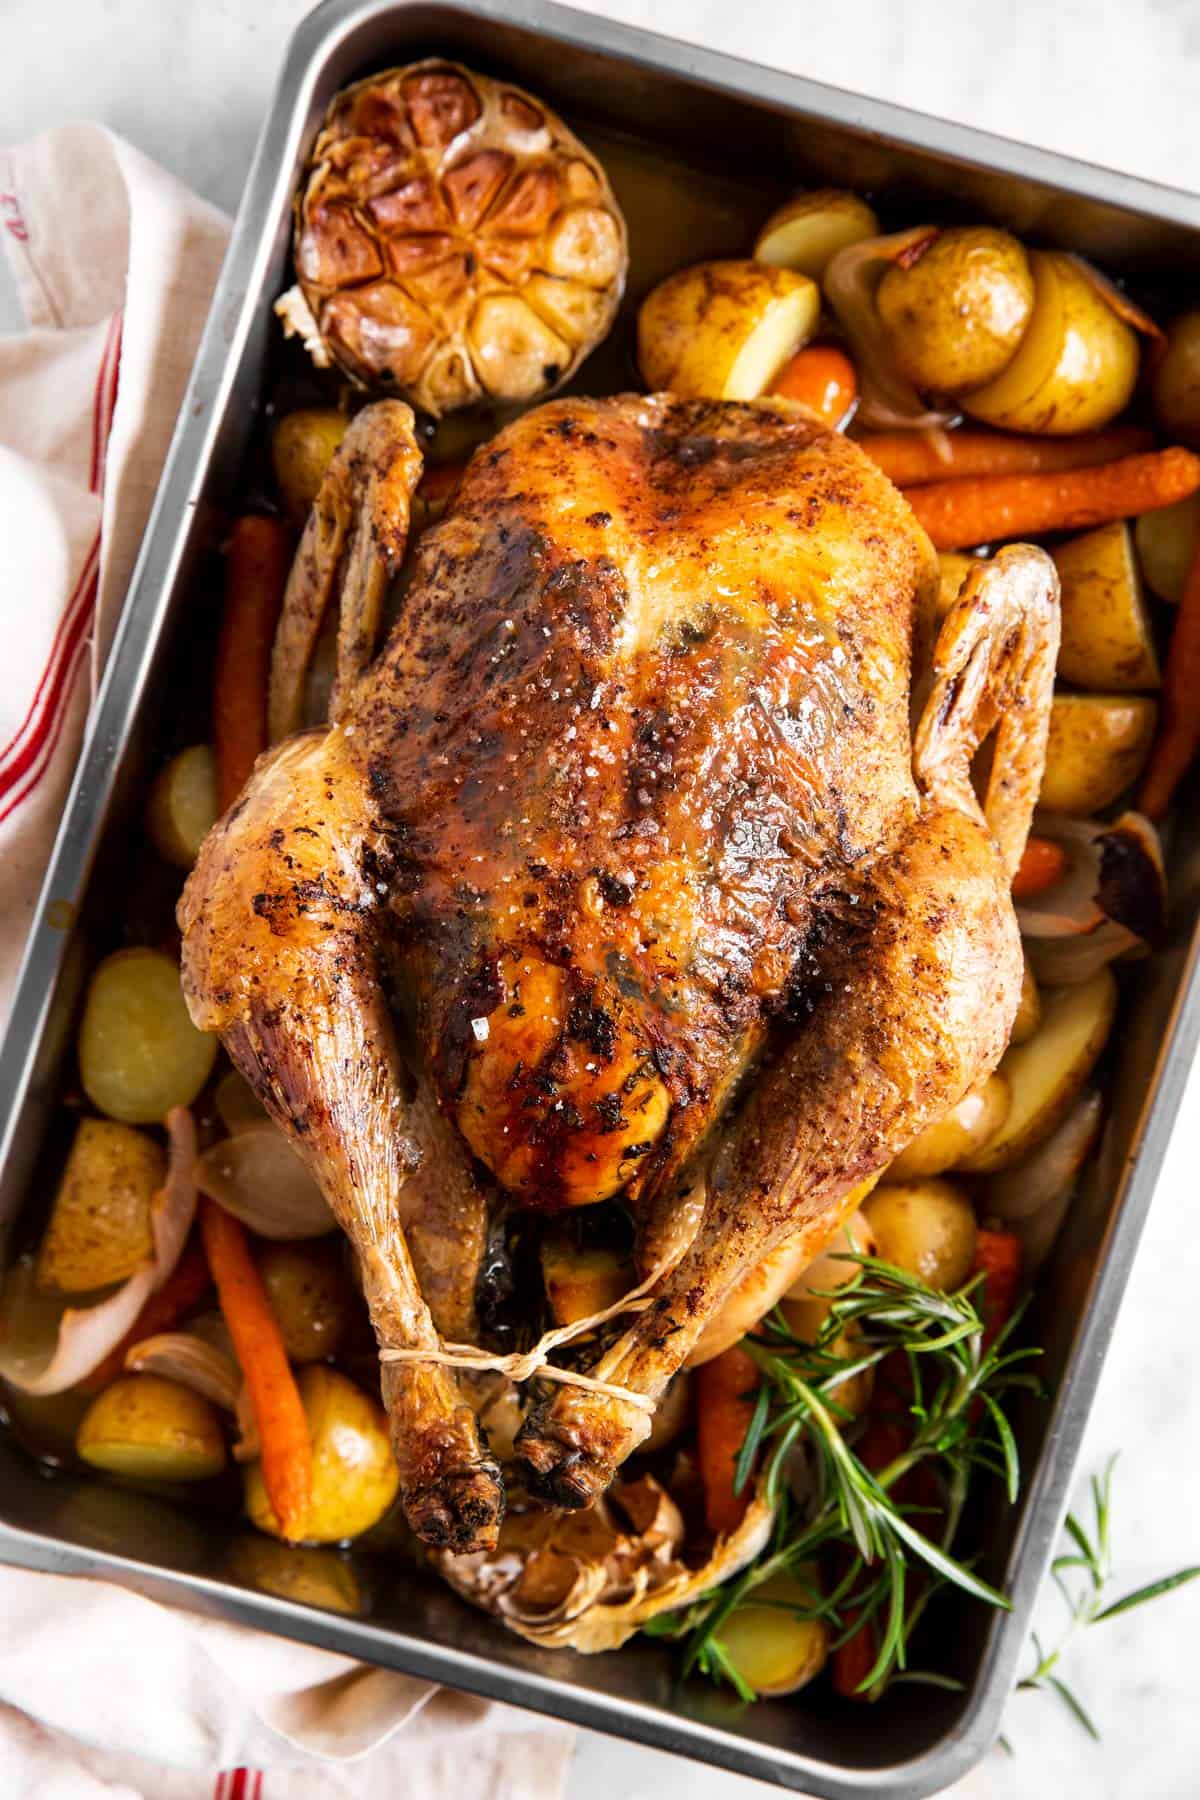 https://www.savorynothings.com/wp-content/uploads/2021/04/whole-roasted-chicken-image-1.jpg